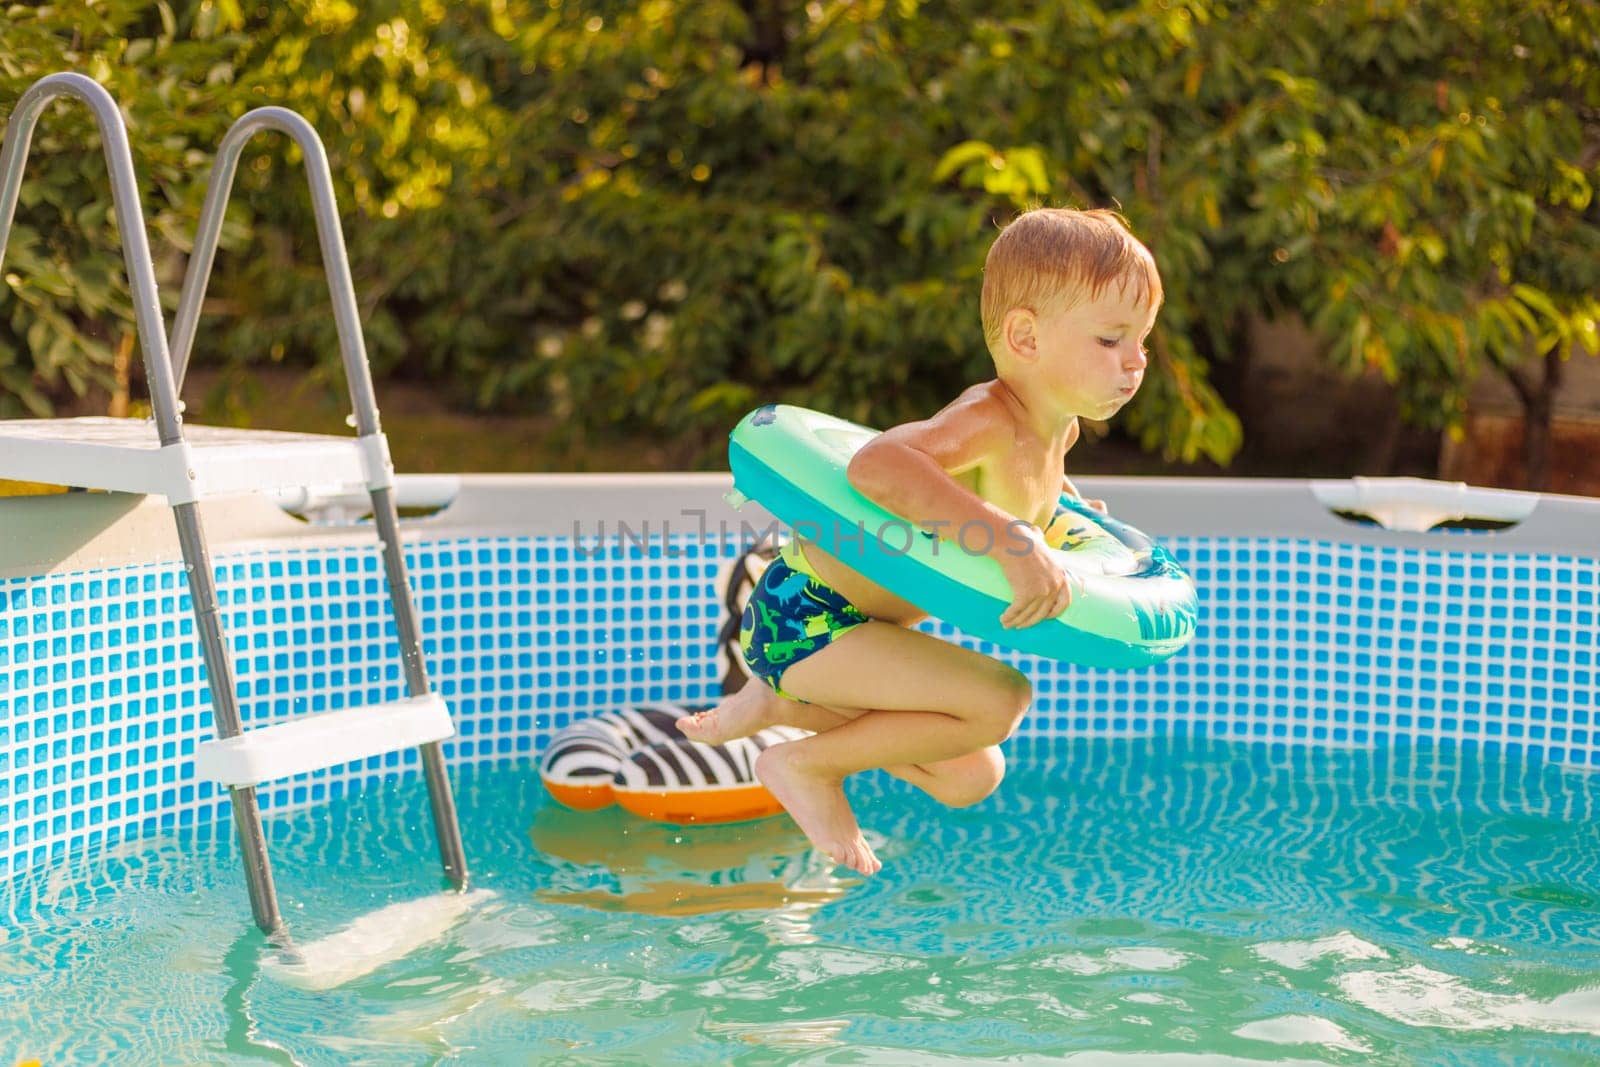 A little boy in swim trunks leaps into a swimming pool with a bright float ring on a sunny day, full of excitement.